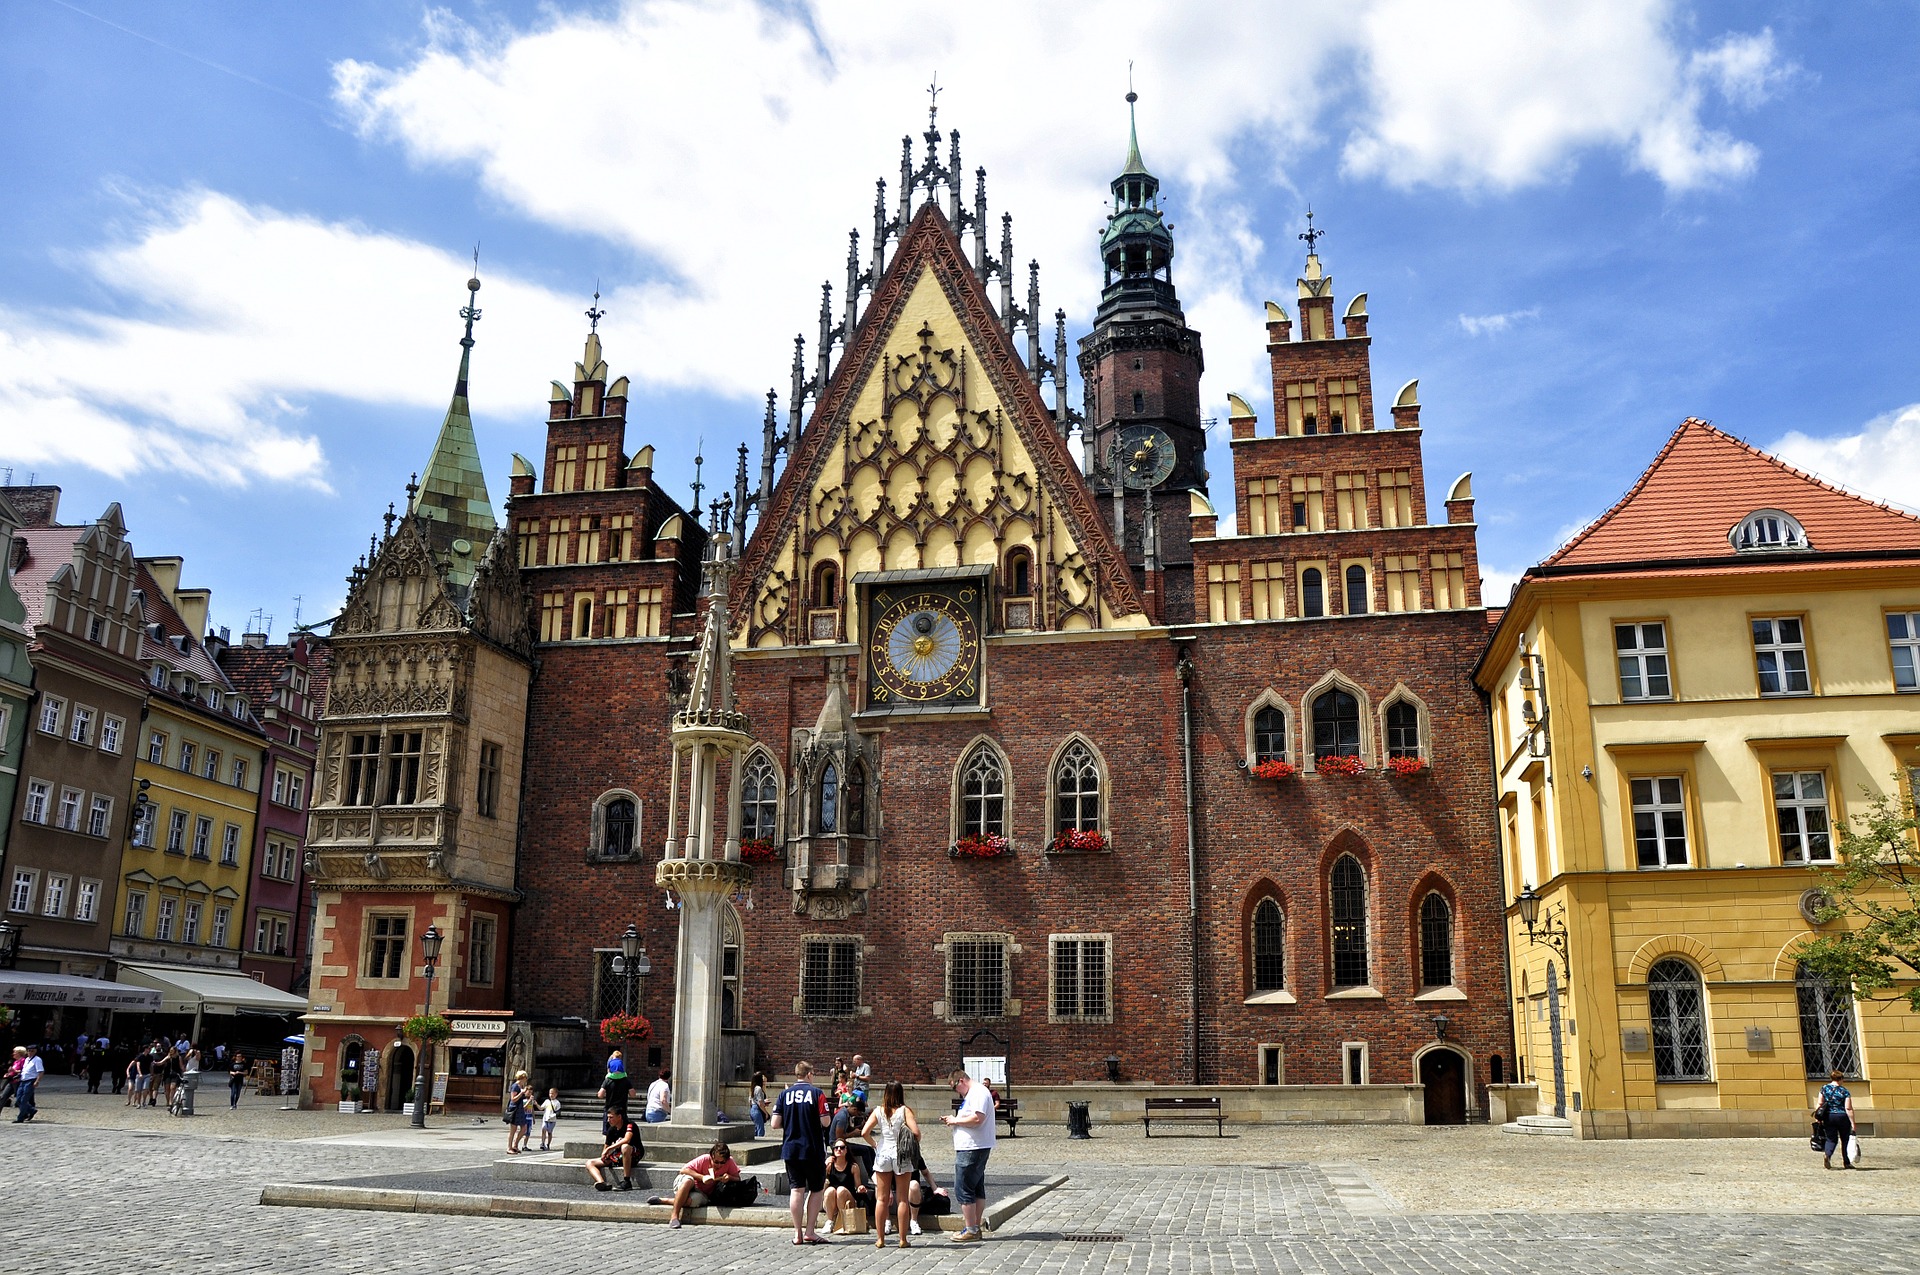 Wroclaw – the nicest attractions